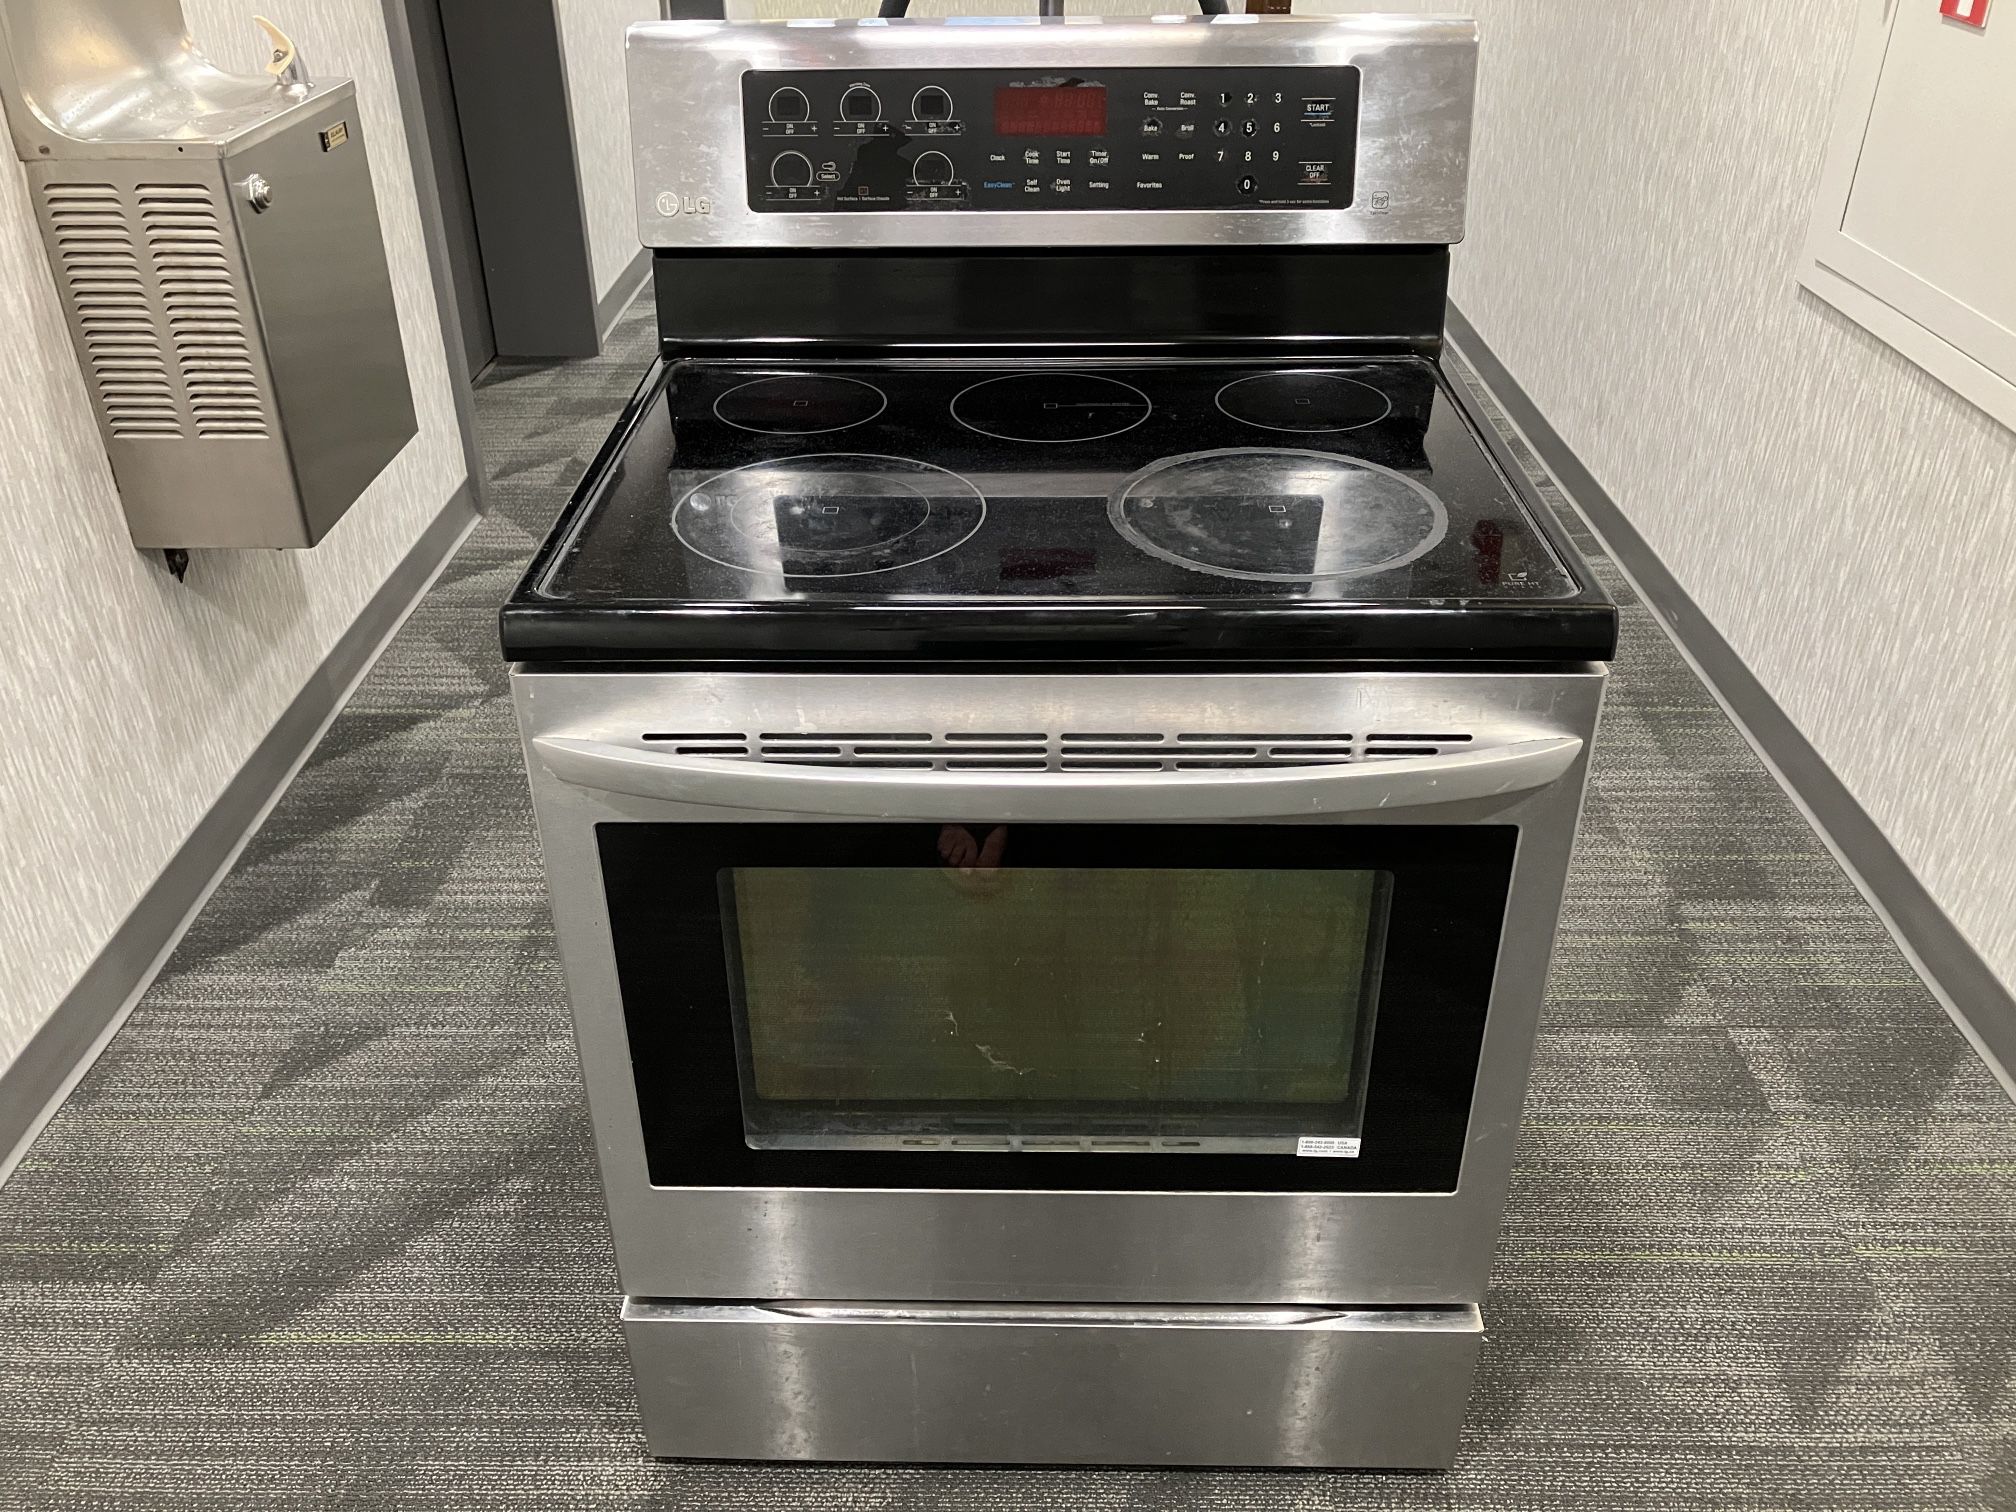 LG Stainless Convection Oven - PENDING